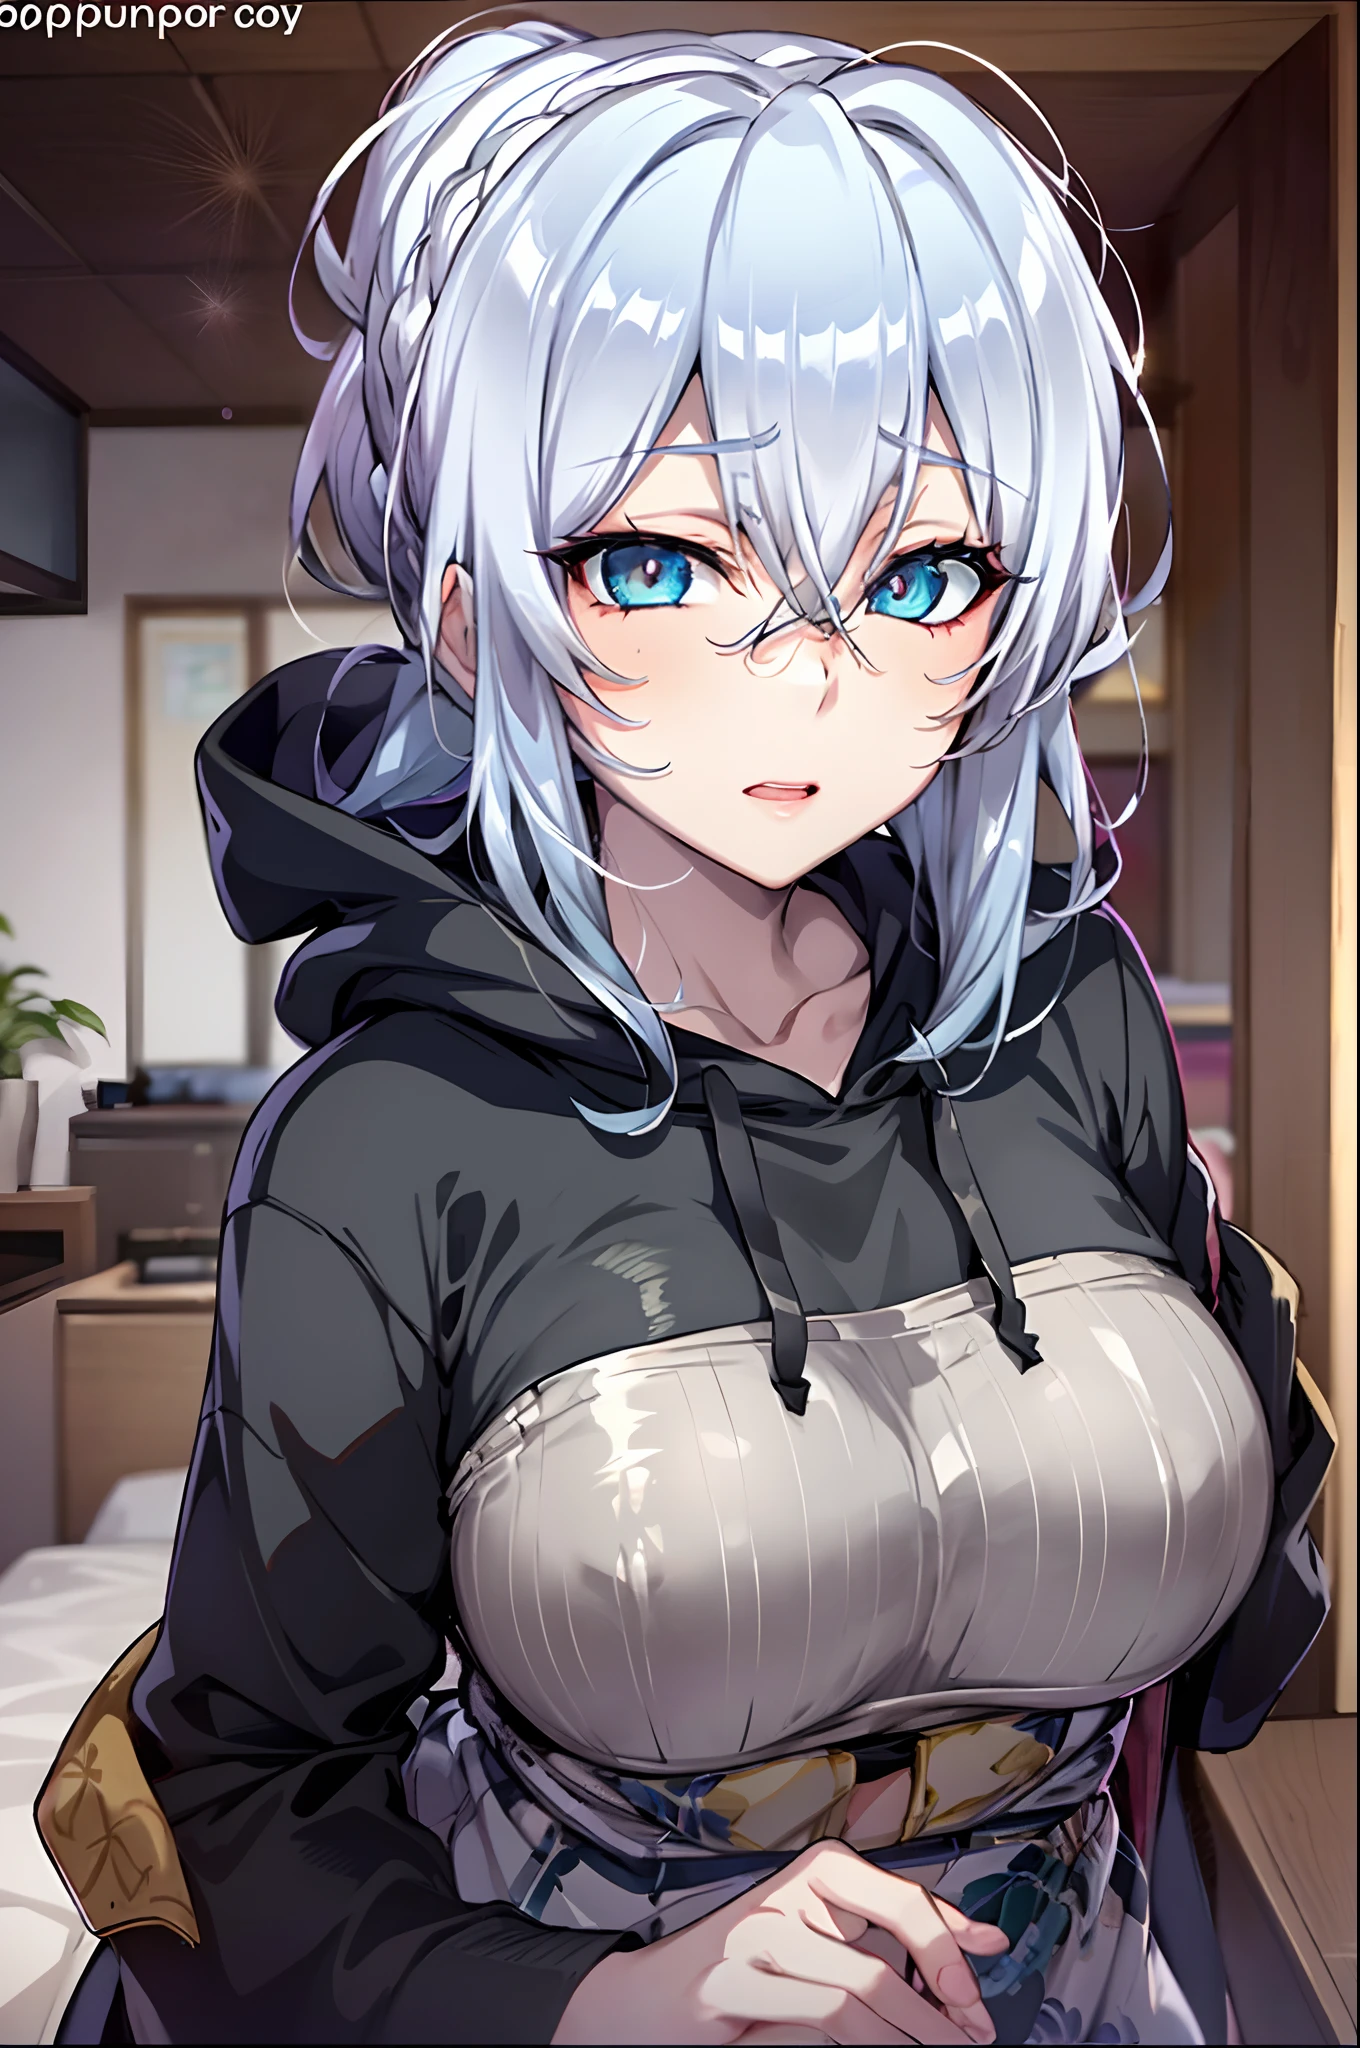 Yukino, one the bed, Silver hair and  eyes in a black hoodie, anime visual of a cute girl, screenshot from the anime film, & her expression is solemn, ahegao face, in the anime film, in an anime, anime visual of a young woman, she has a cute expressive face, still from anime, perfect breast